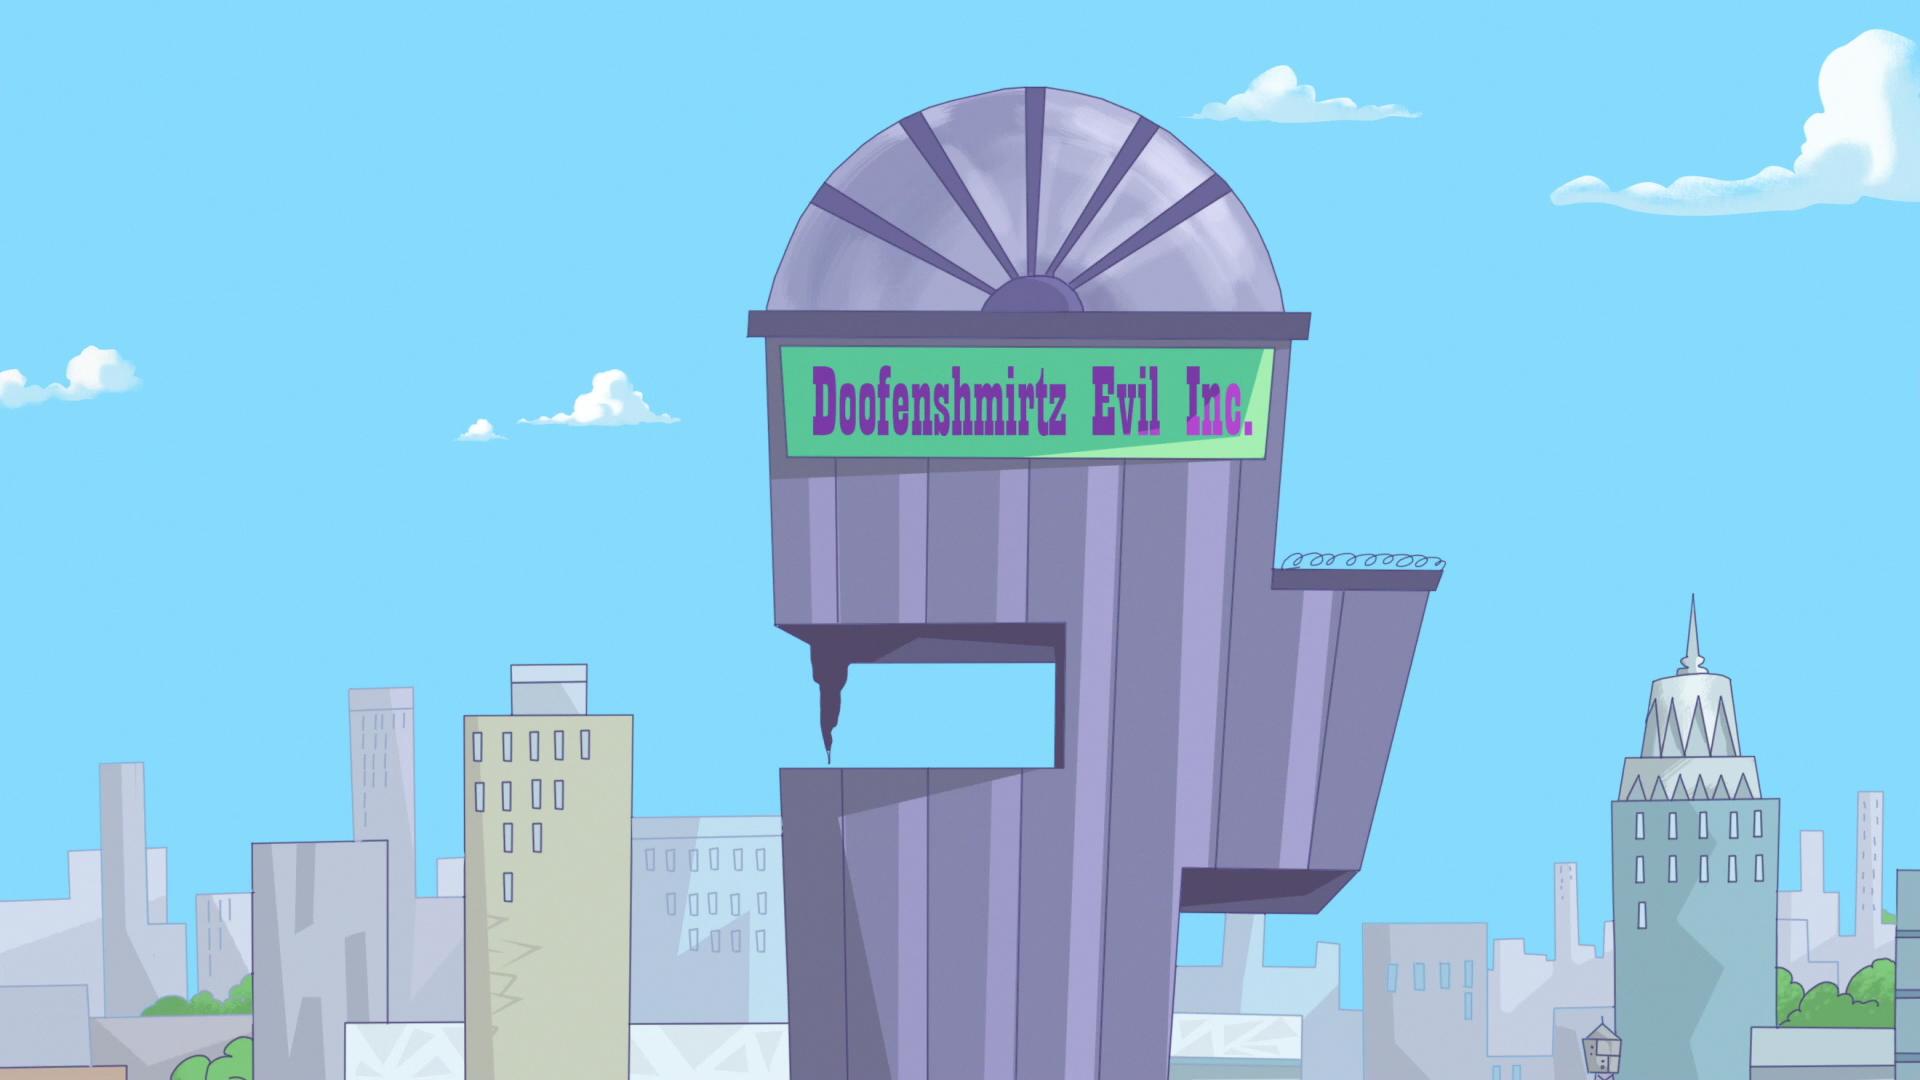 Doofenshmirtz Evil Incorporated. Phineas and Ferb